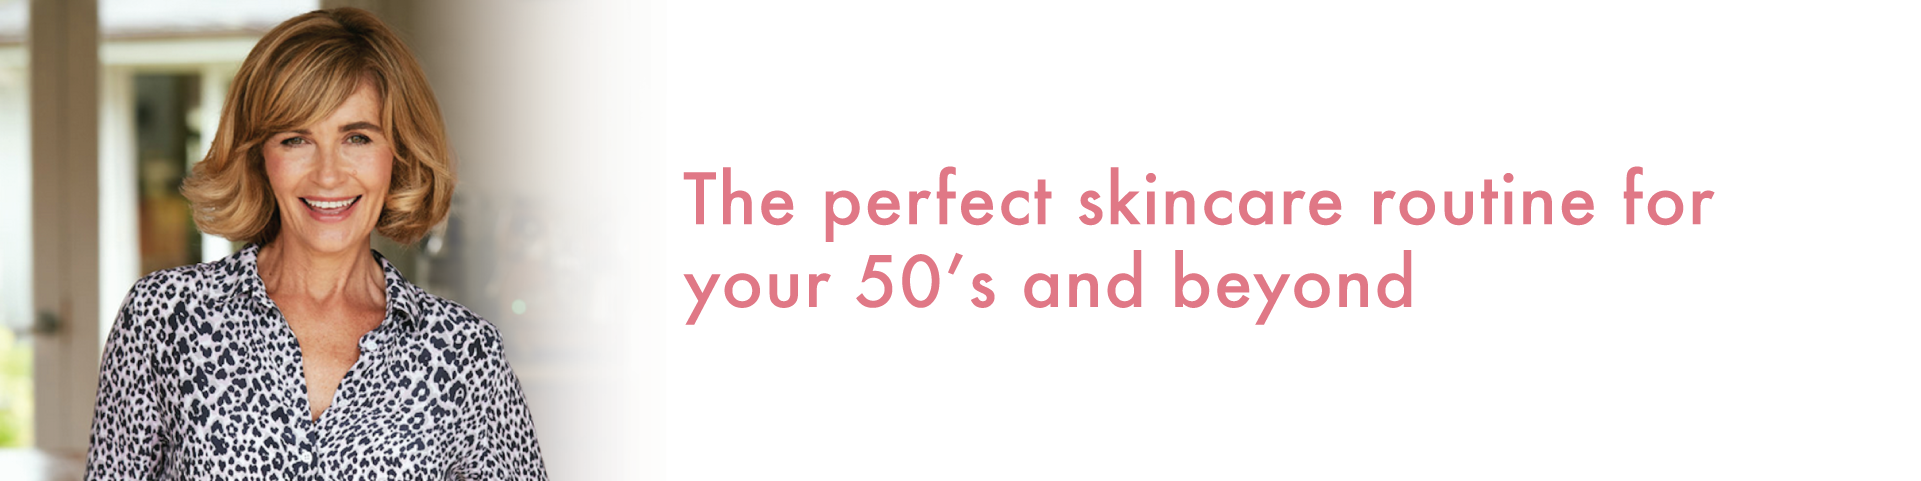 The Perfect Skincare Routine for your 50’s and Beyond